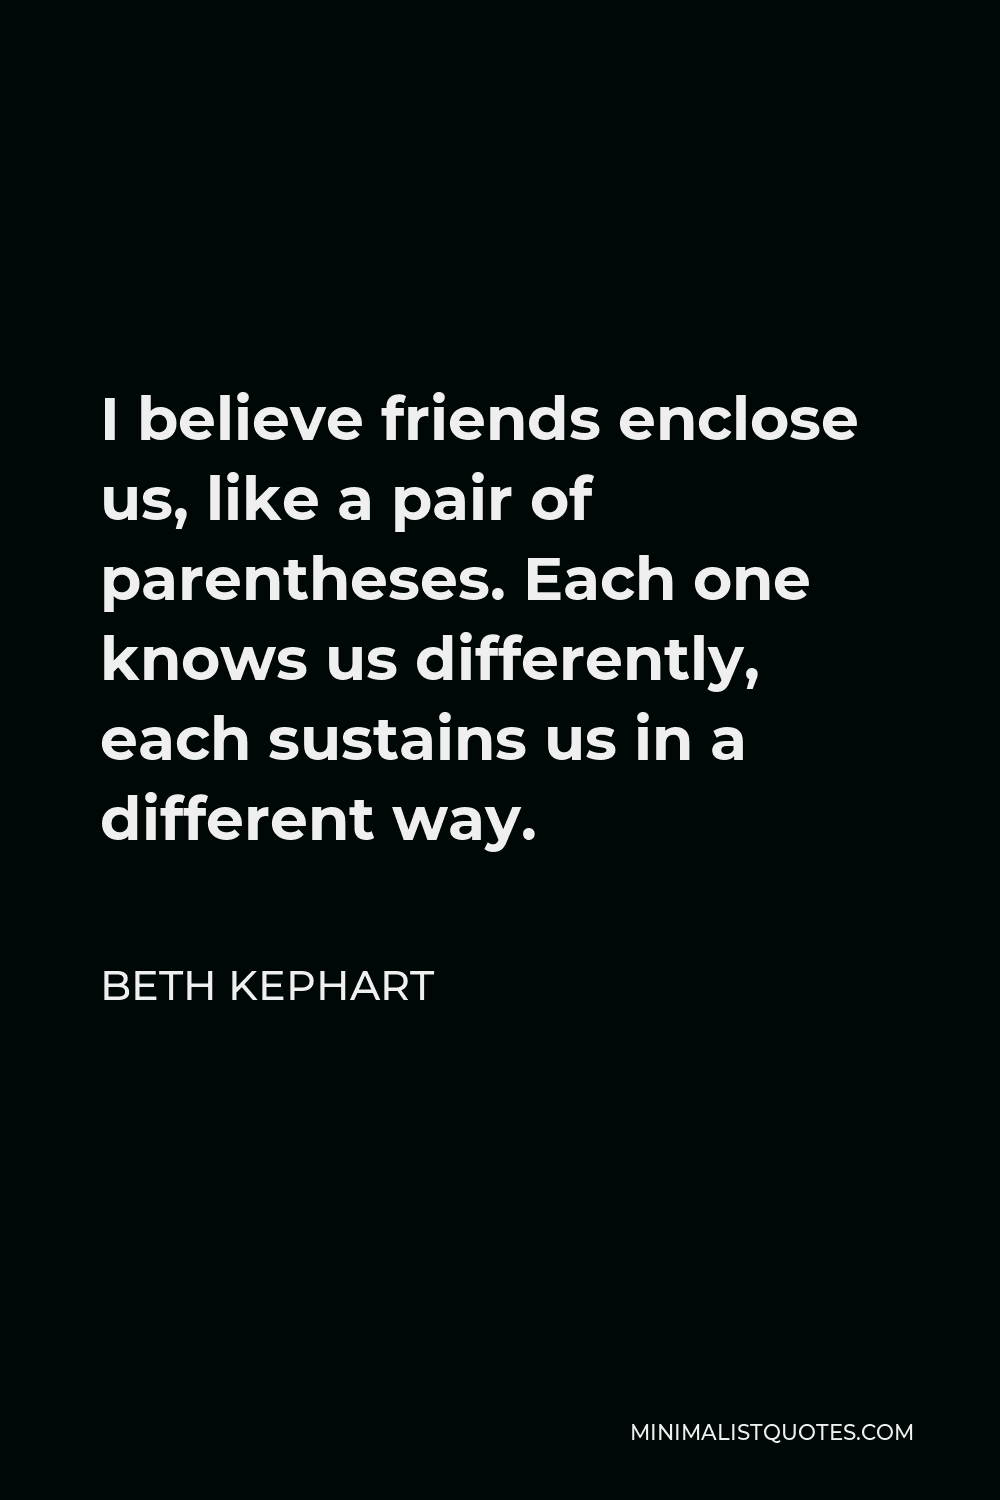 Beth Kephart Quote - I believe friends enclose us, like a pair of parentheses. Each one knows us differently, each sustains us in a different way.